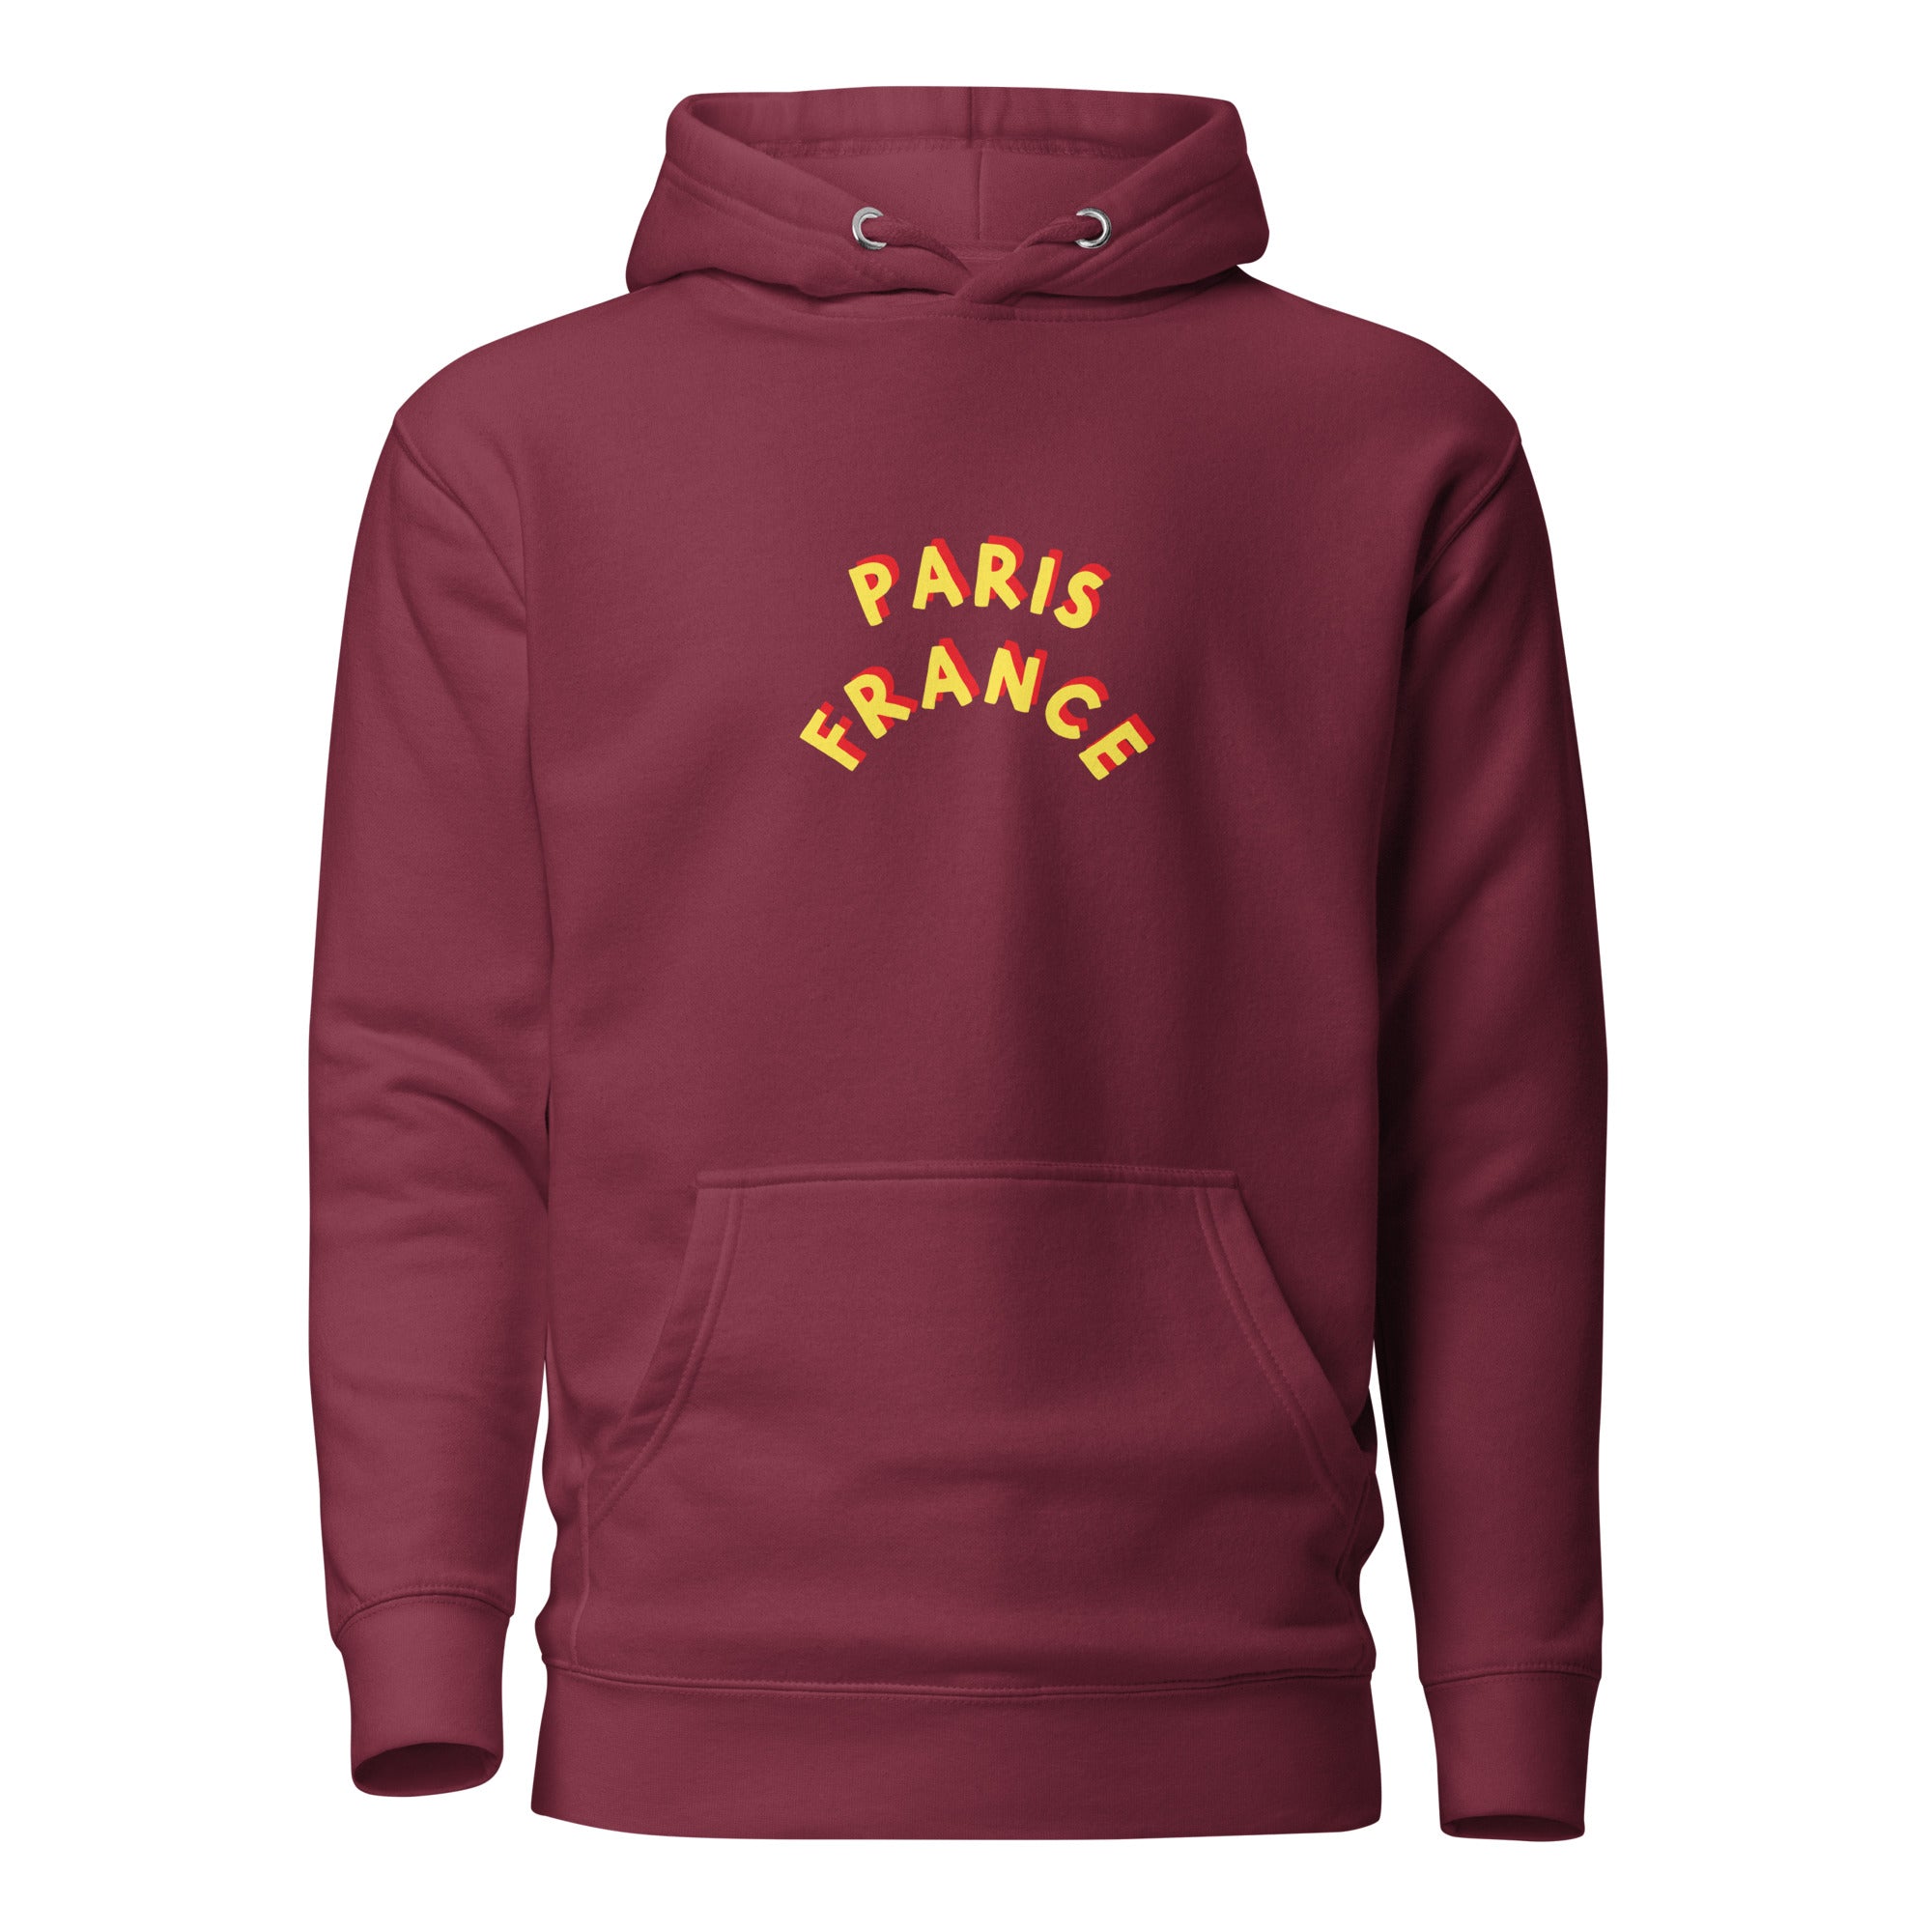 red paris france hoodie for pure comfort and style